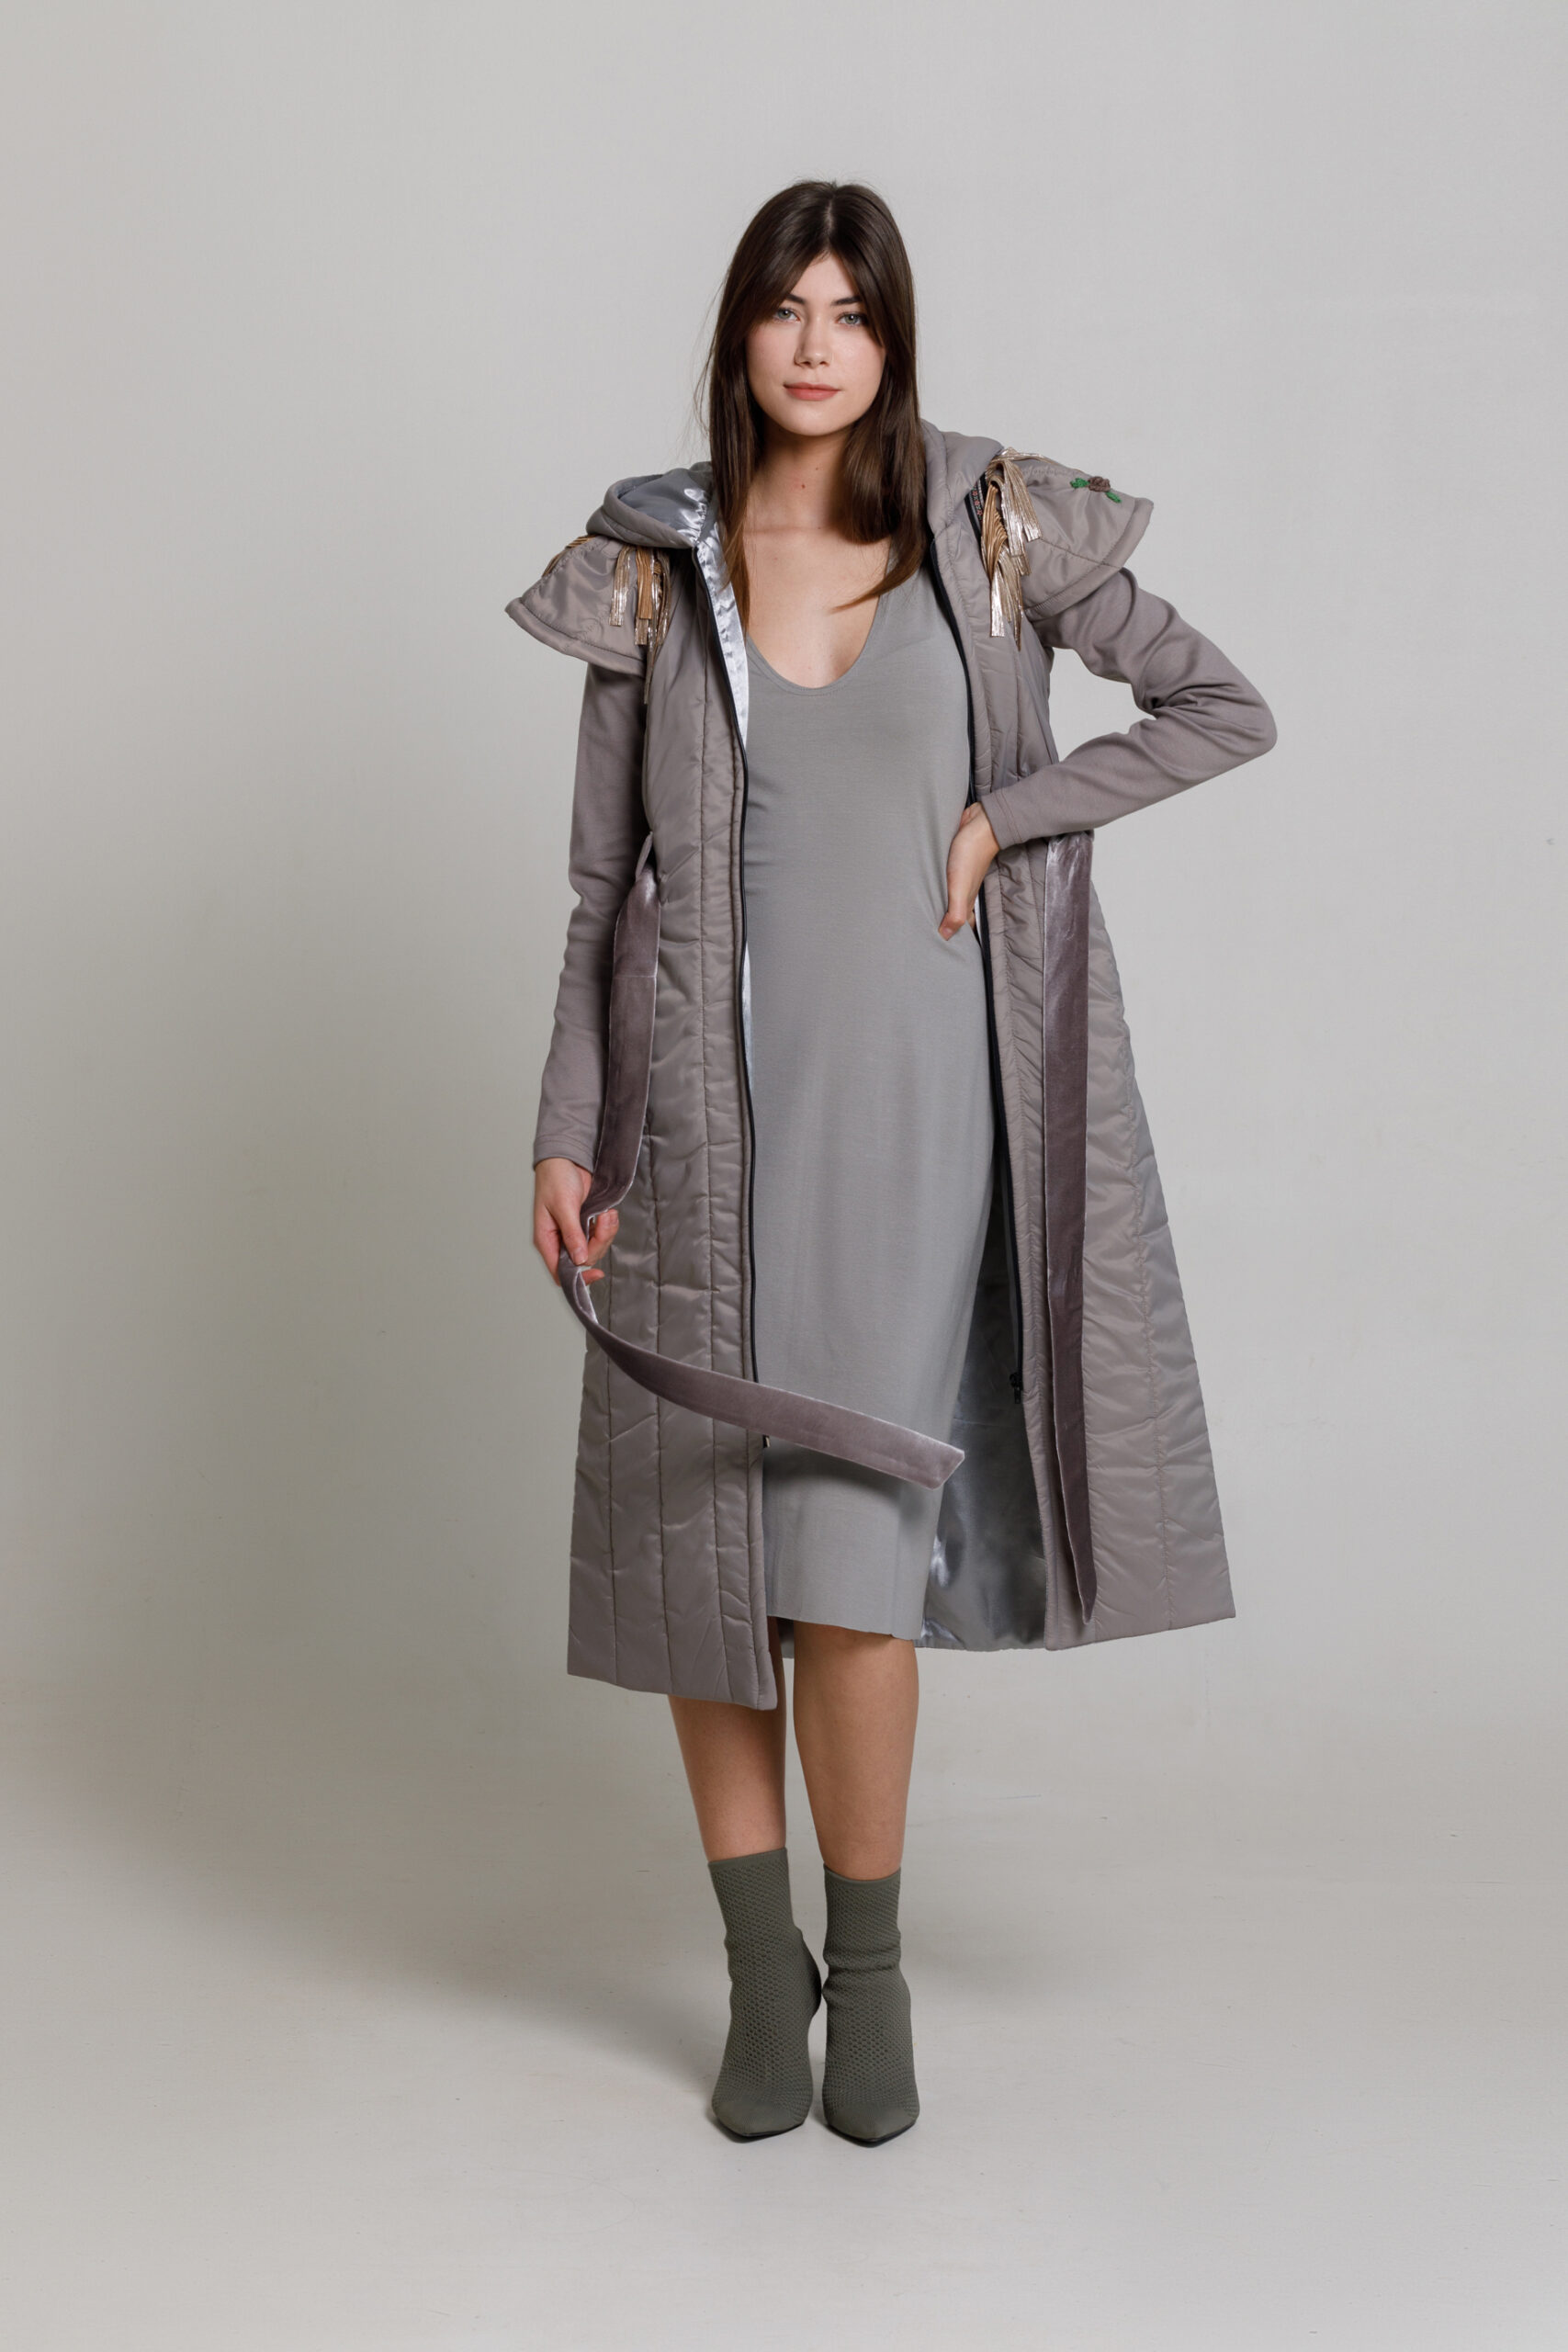 ARES overcoat in gray quilted strip. Natural fabrics, original design, handmade embroidery